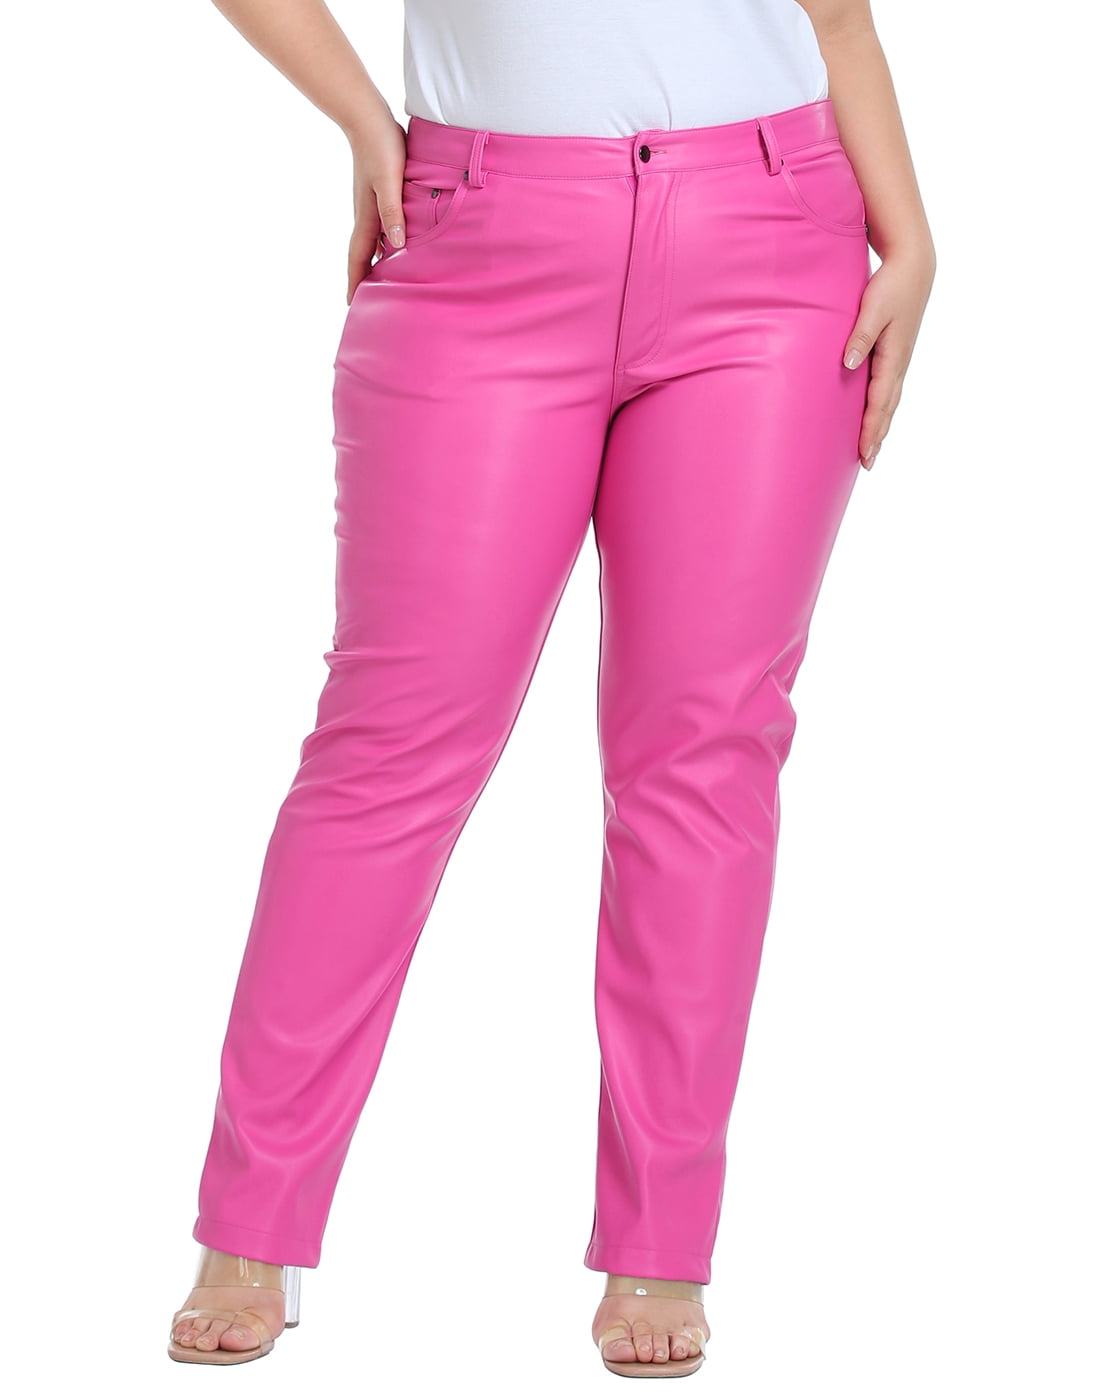 HDE Women's Plus Size High Waisted Faux Leather Pants with Pockets Hot Pink  3X 